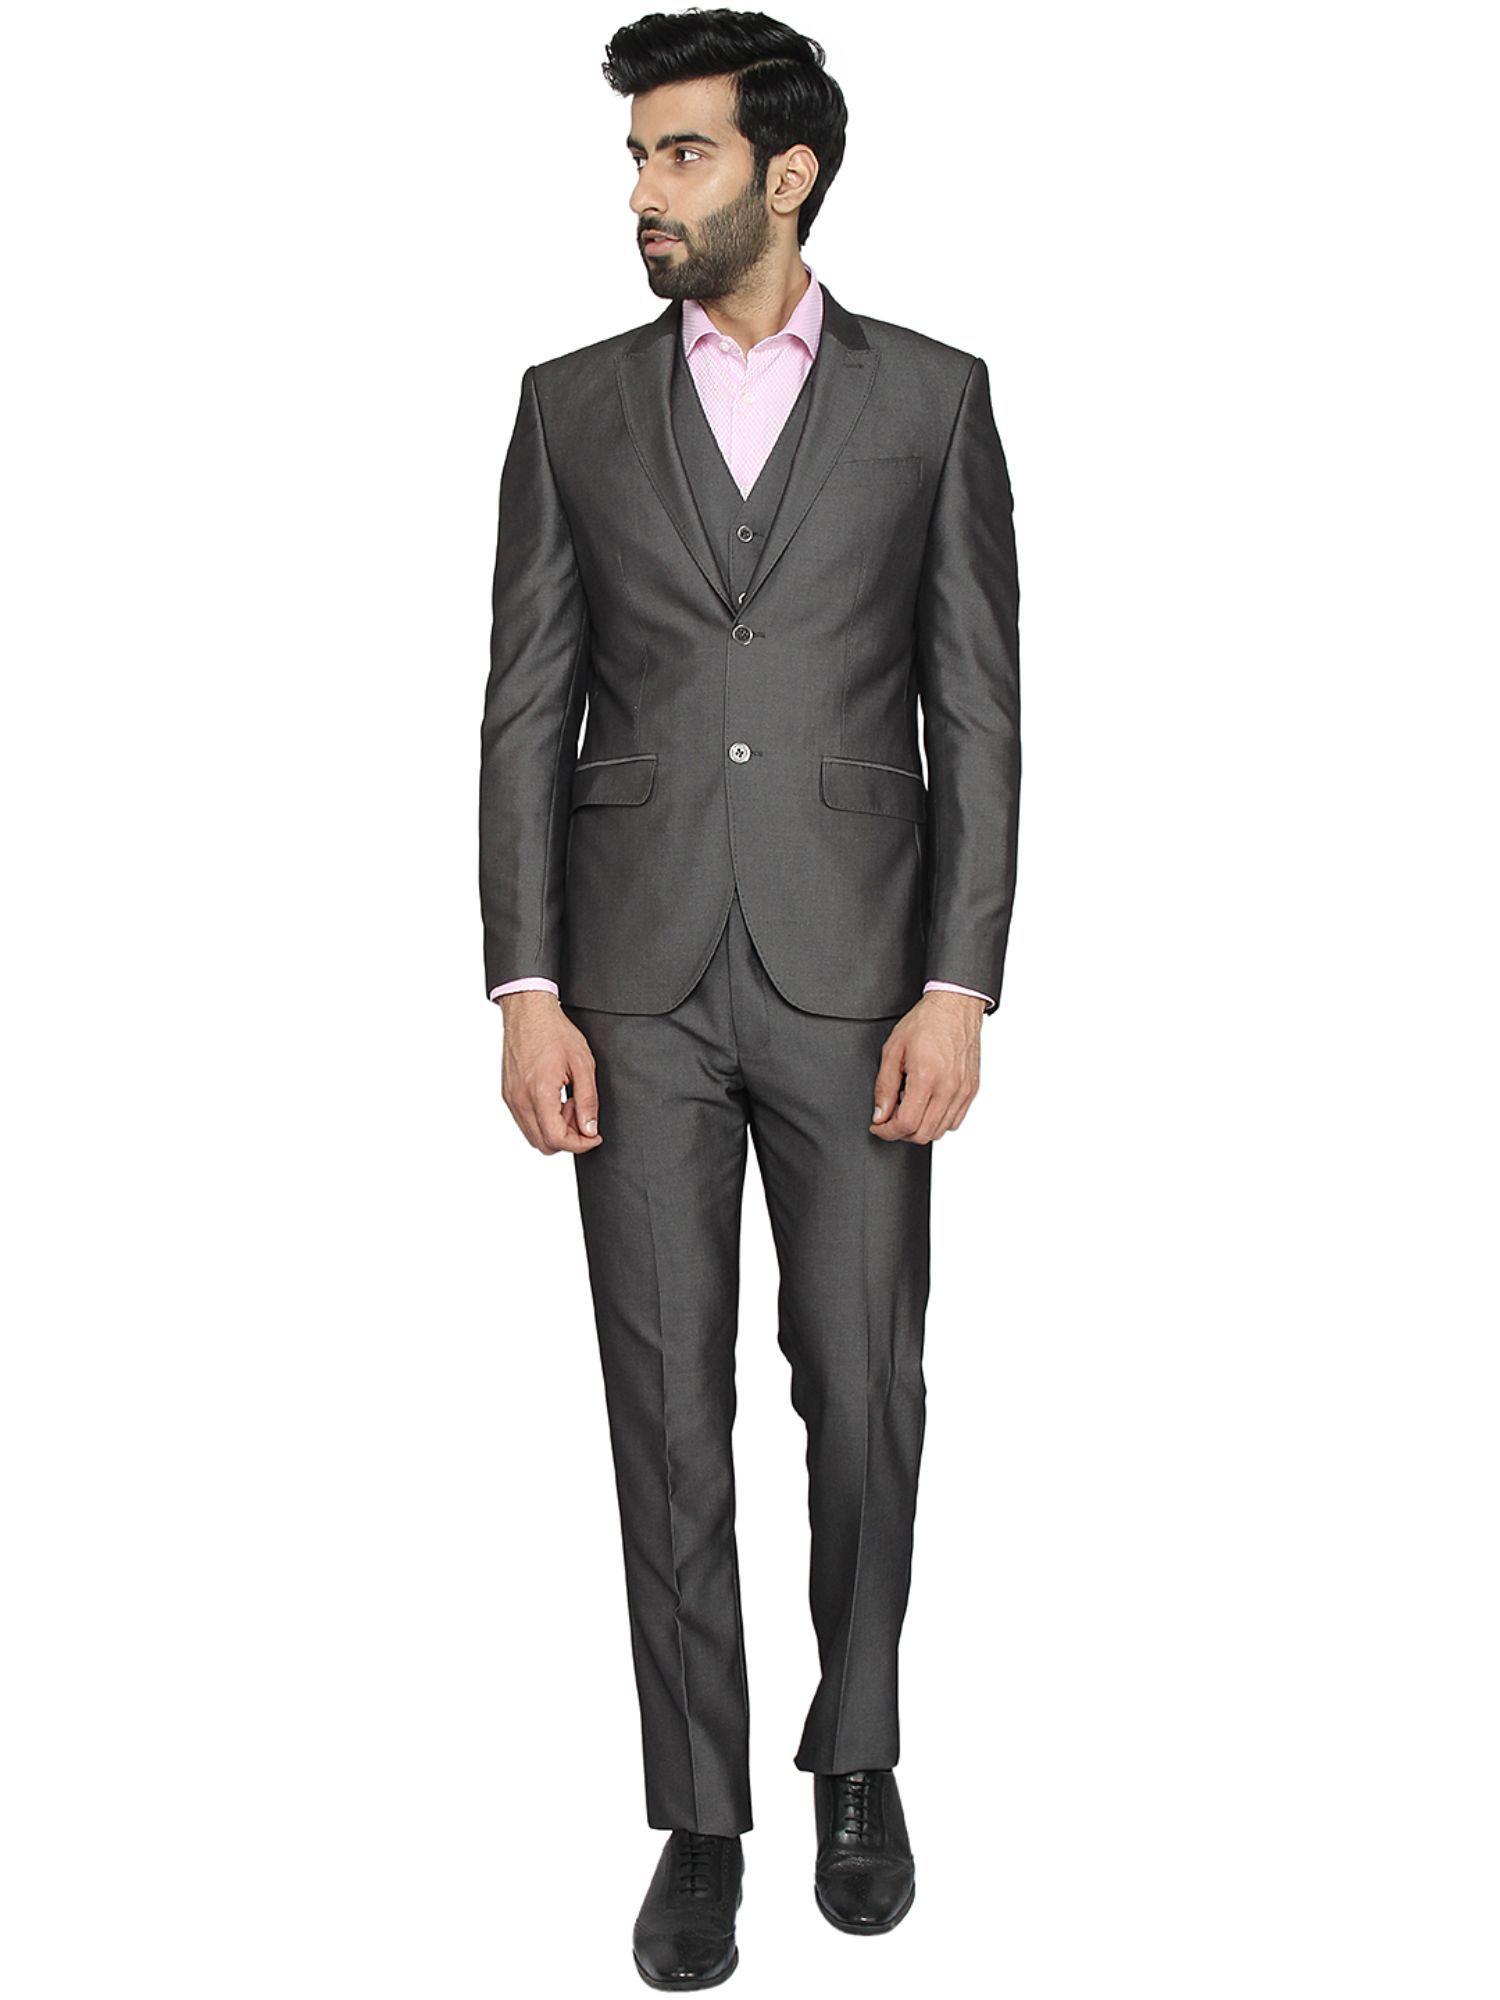 jeff-formal-slim-fit-3-pc-solid-suits-in-black-(set-of-3)